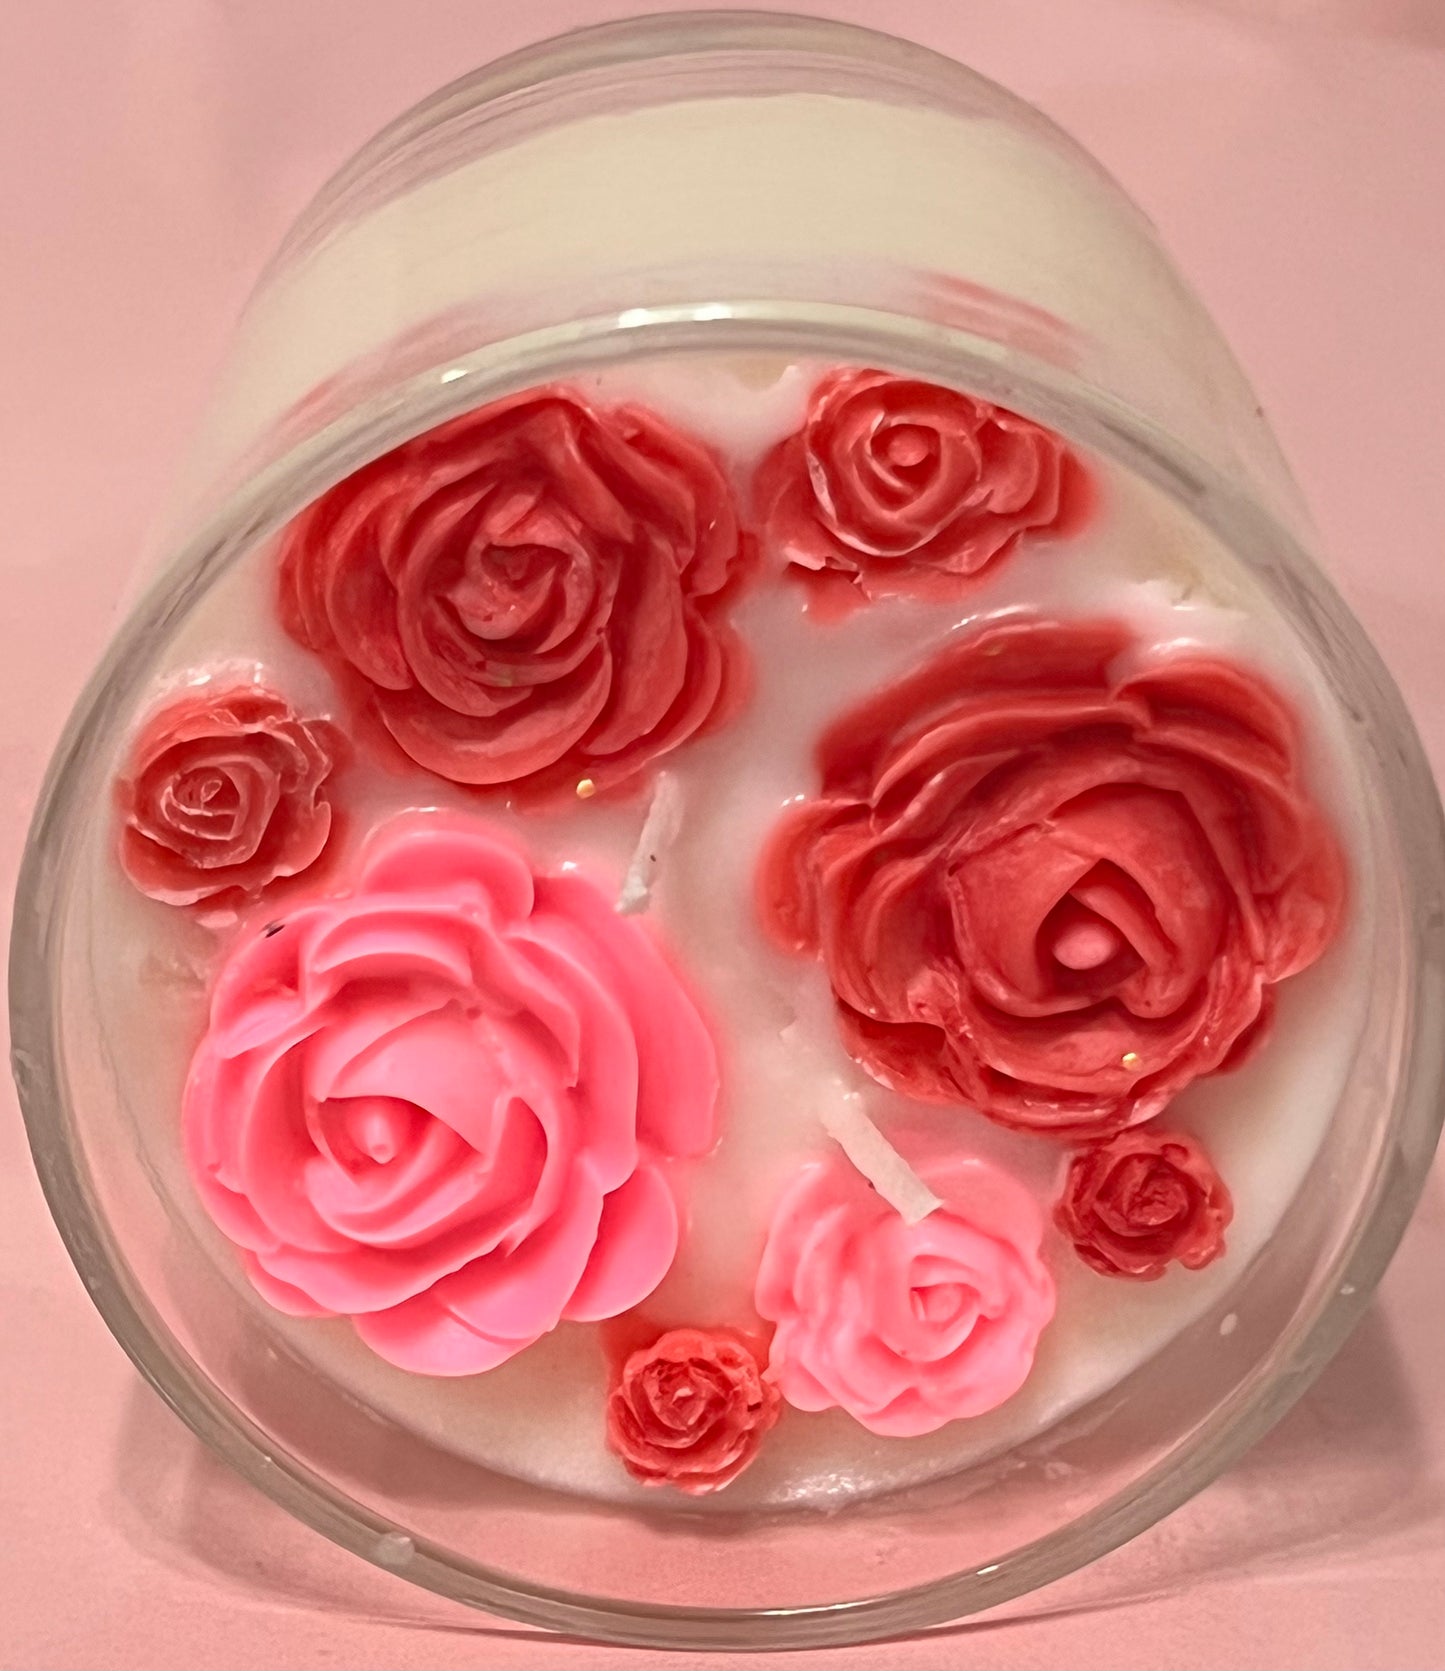 Bed  of Roses Scented  candle with surprise inside